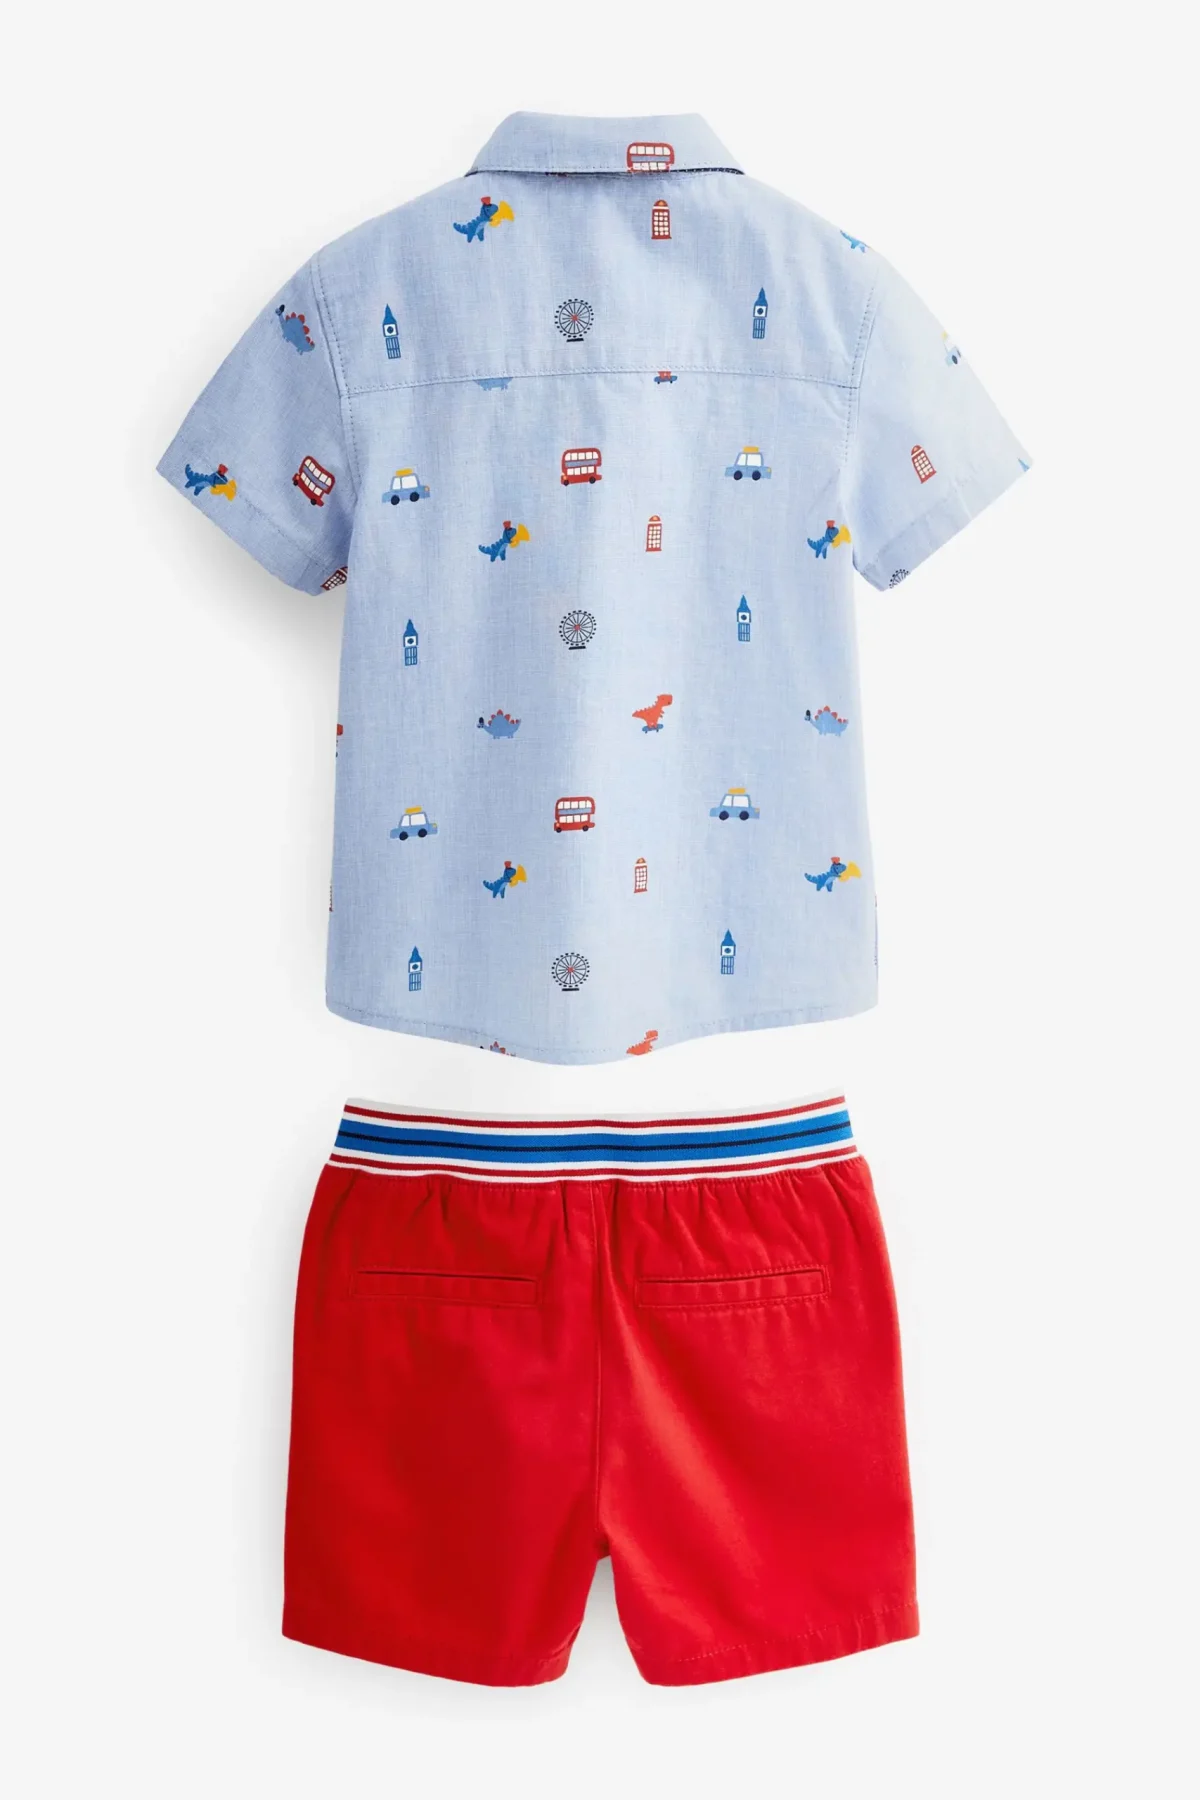 official set shirt and shorts with dinosaur design